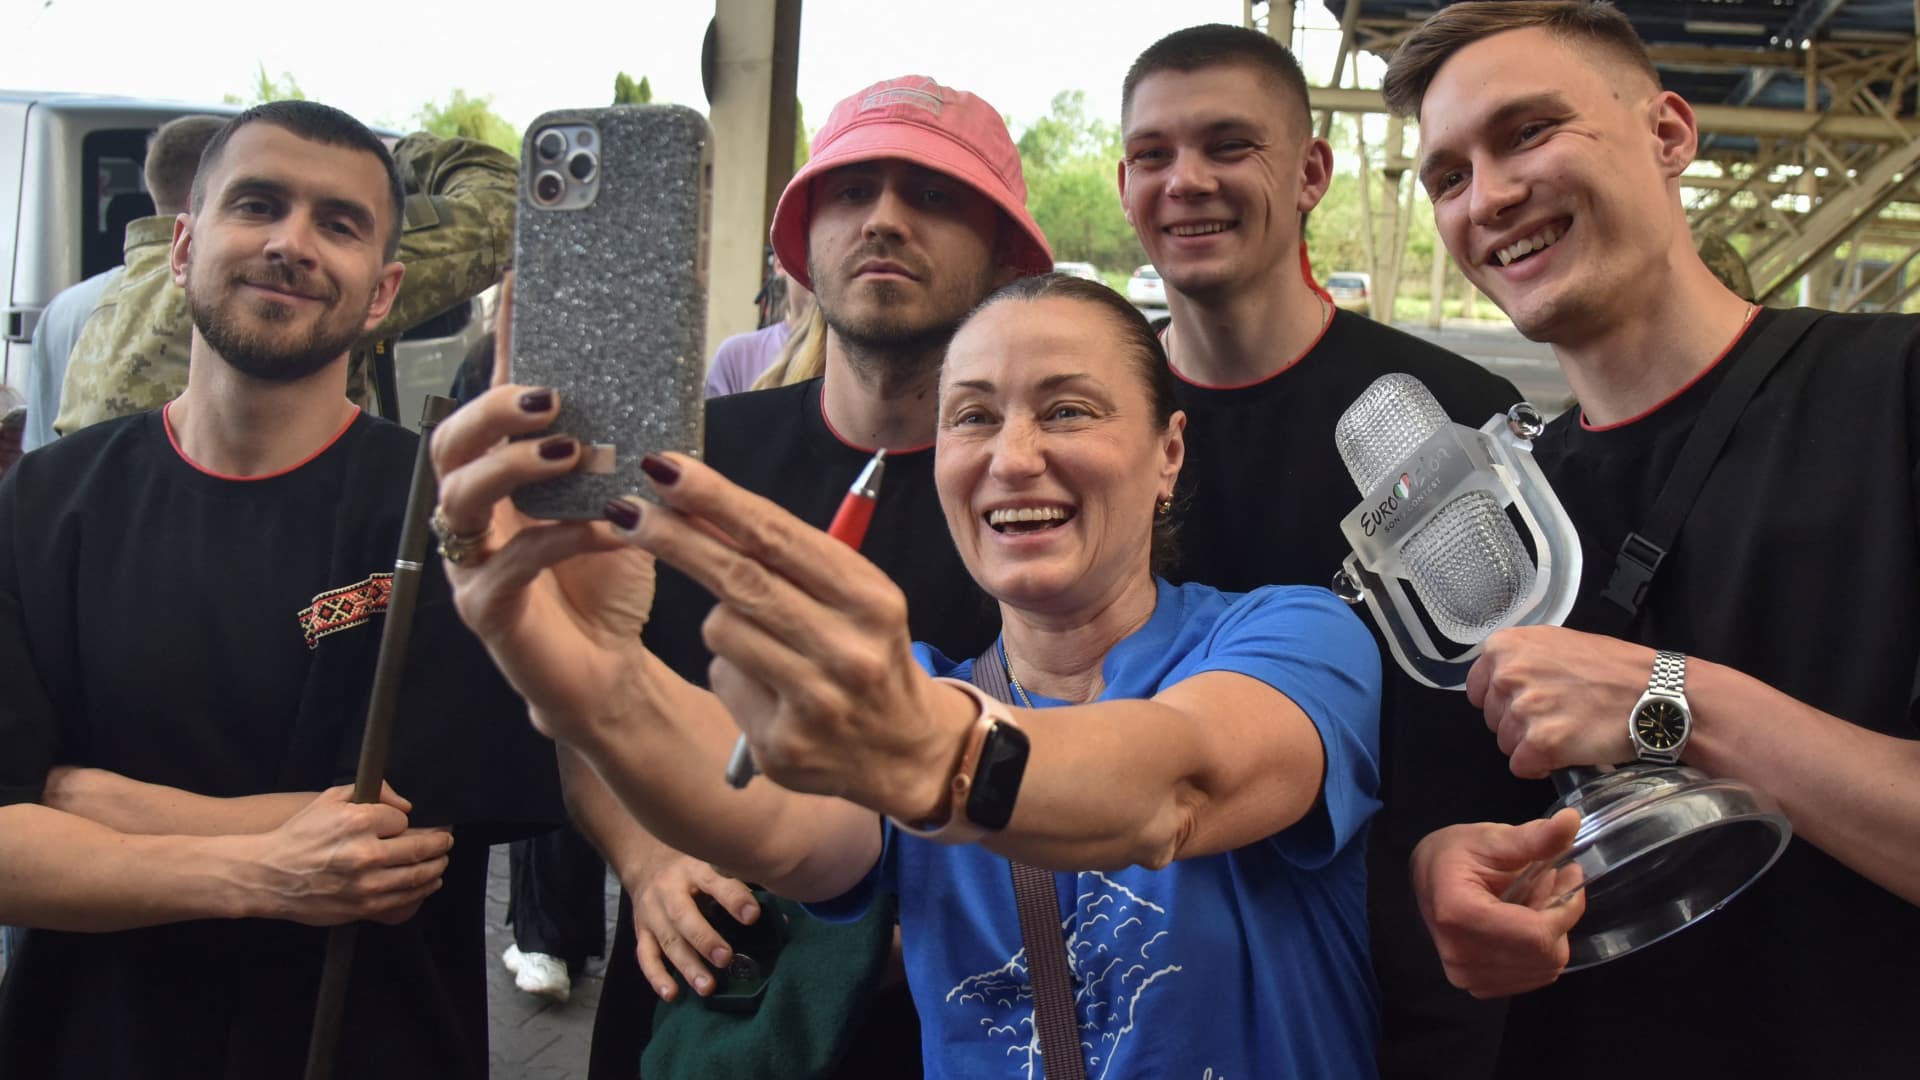 Kalush Orchestra, the winners of the 2022 Eurovision Song Contest, pose for a selfie picture with a Ukrainian woman as they arrive at the Ukraine-Poland border crossing point near the village of Krakovets, in Lviv region, Ukraine May 16, 2022. 